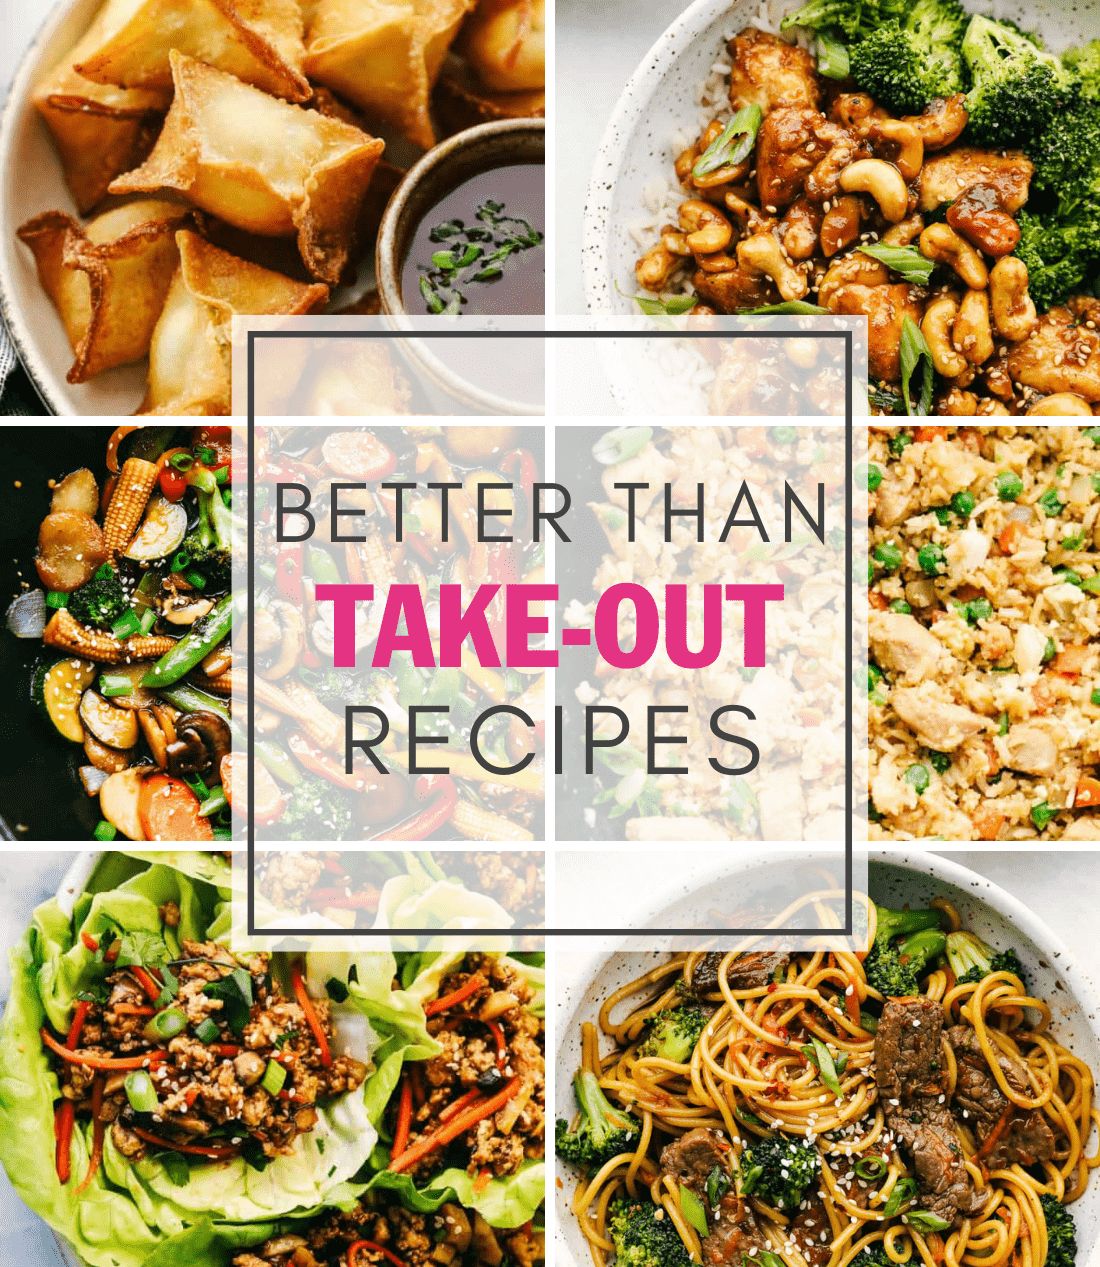 Better Than Take-Out Recipes | The Recipe Critic